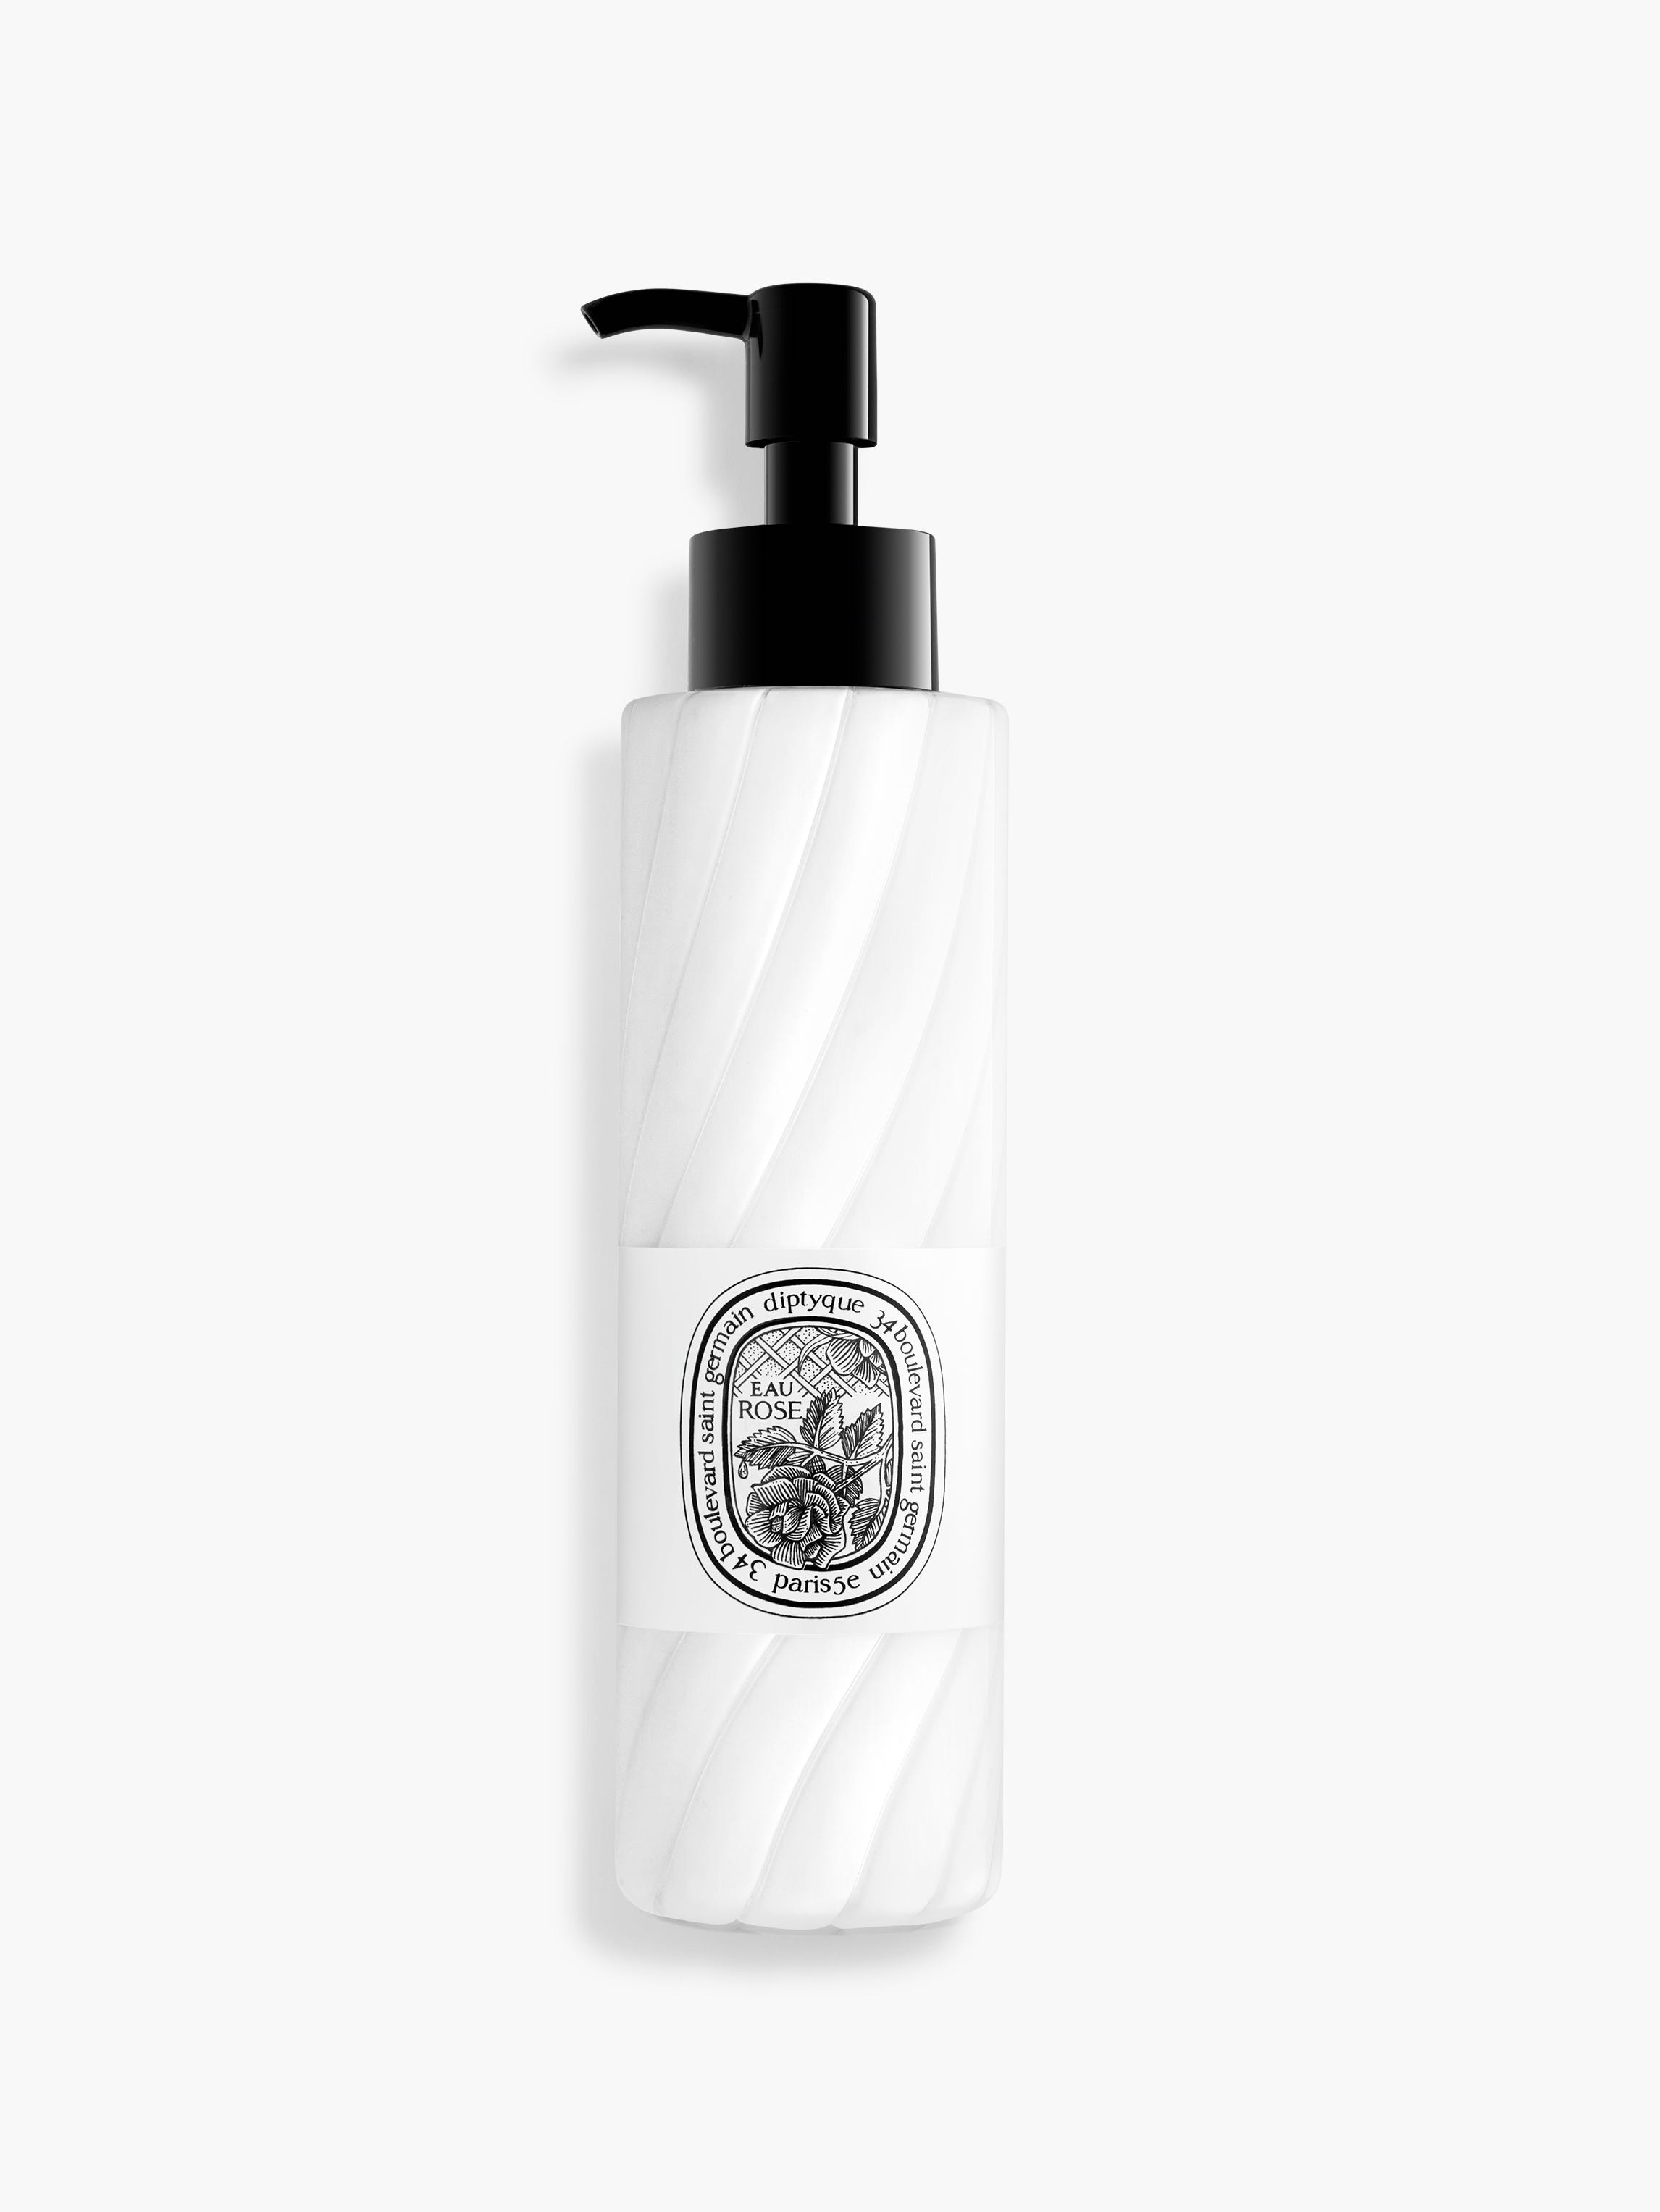 Eau Rose - Perfumed hand and body lotion 200ml | Diptyque Paris